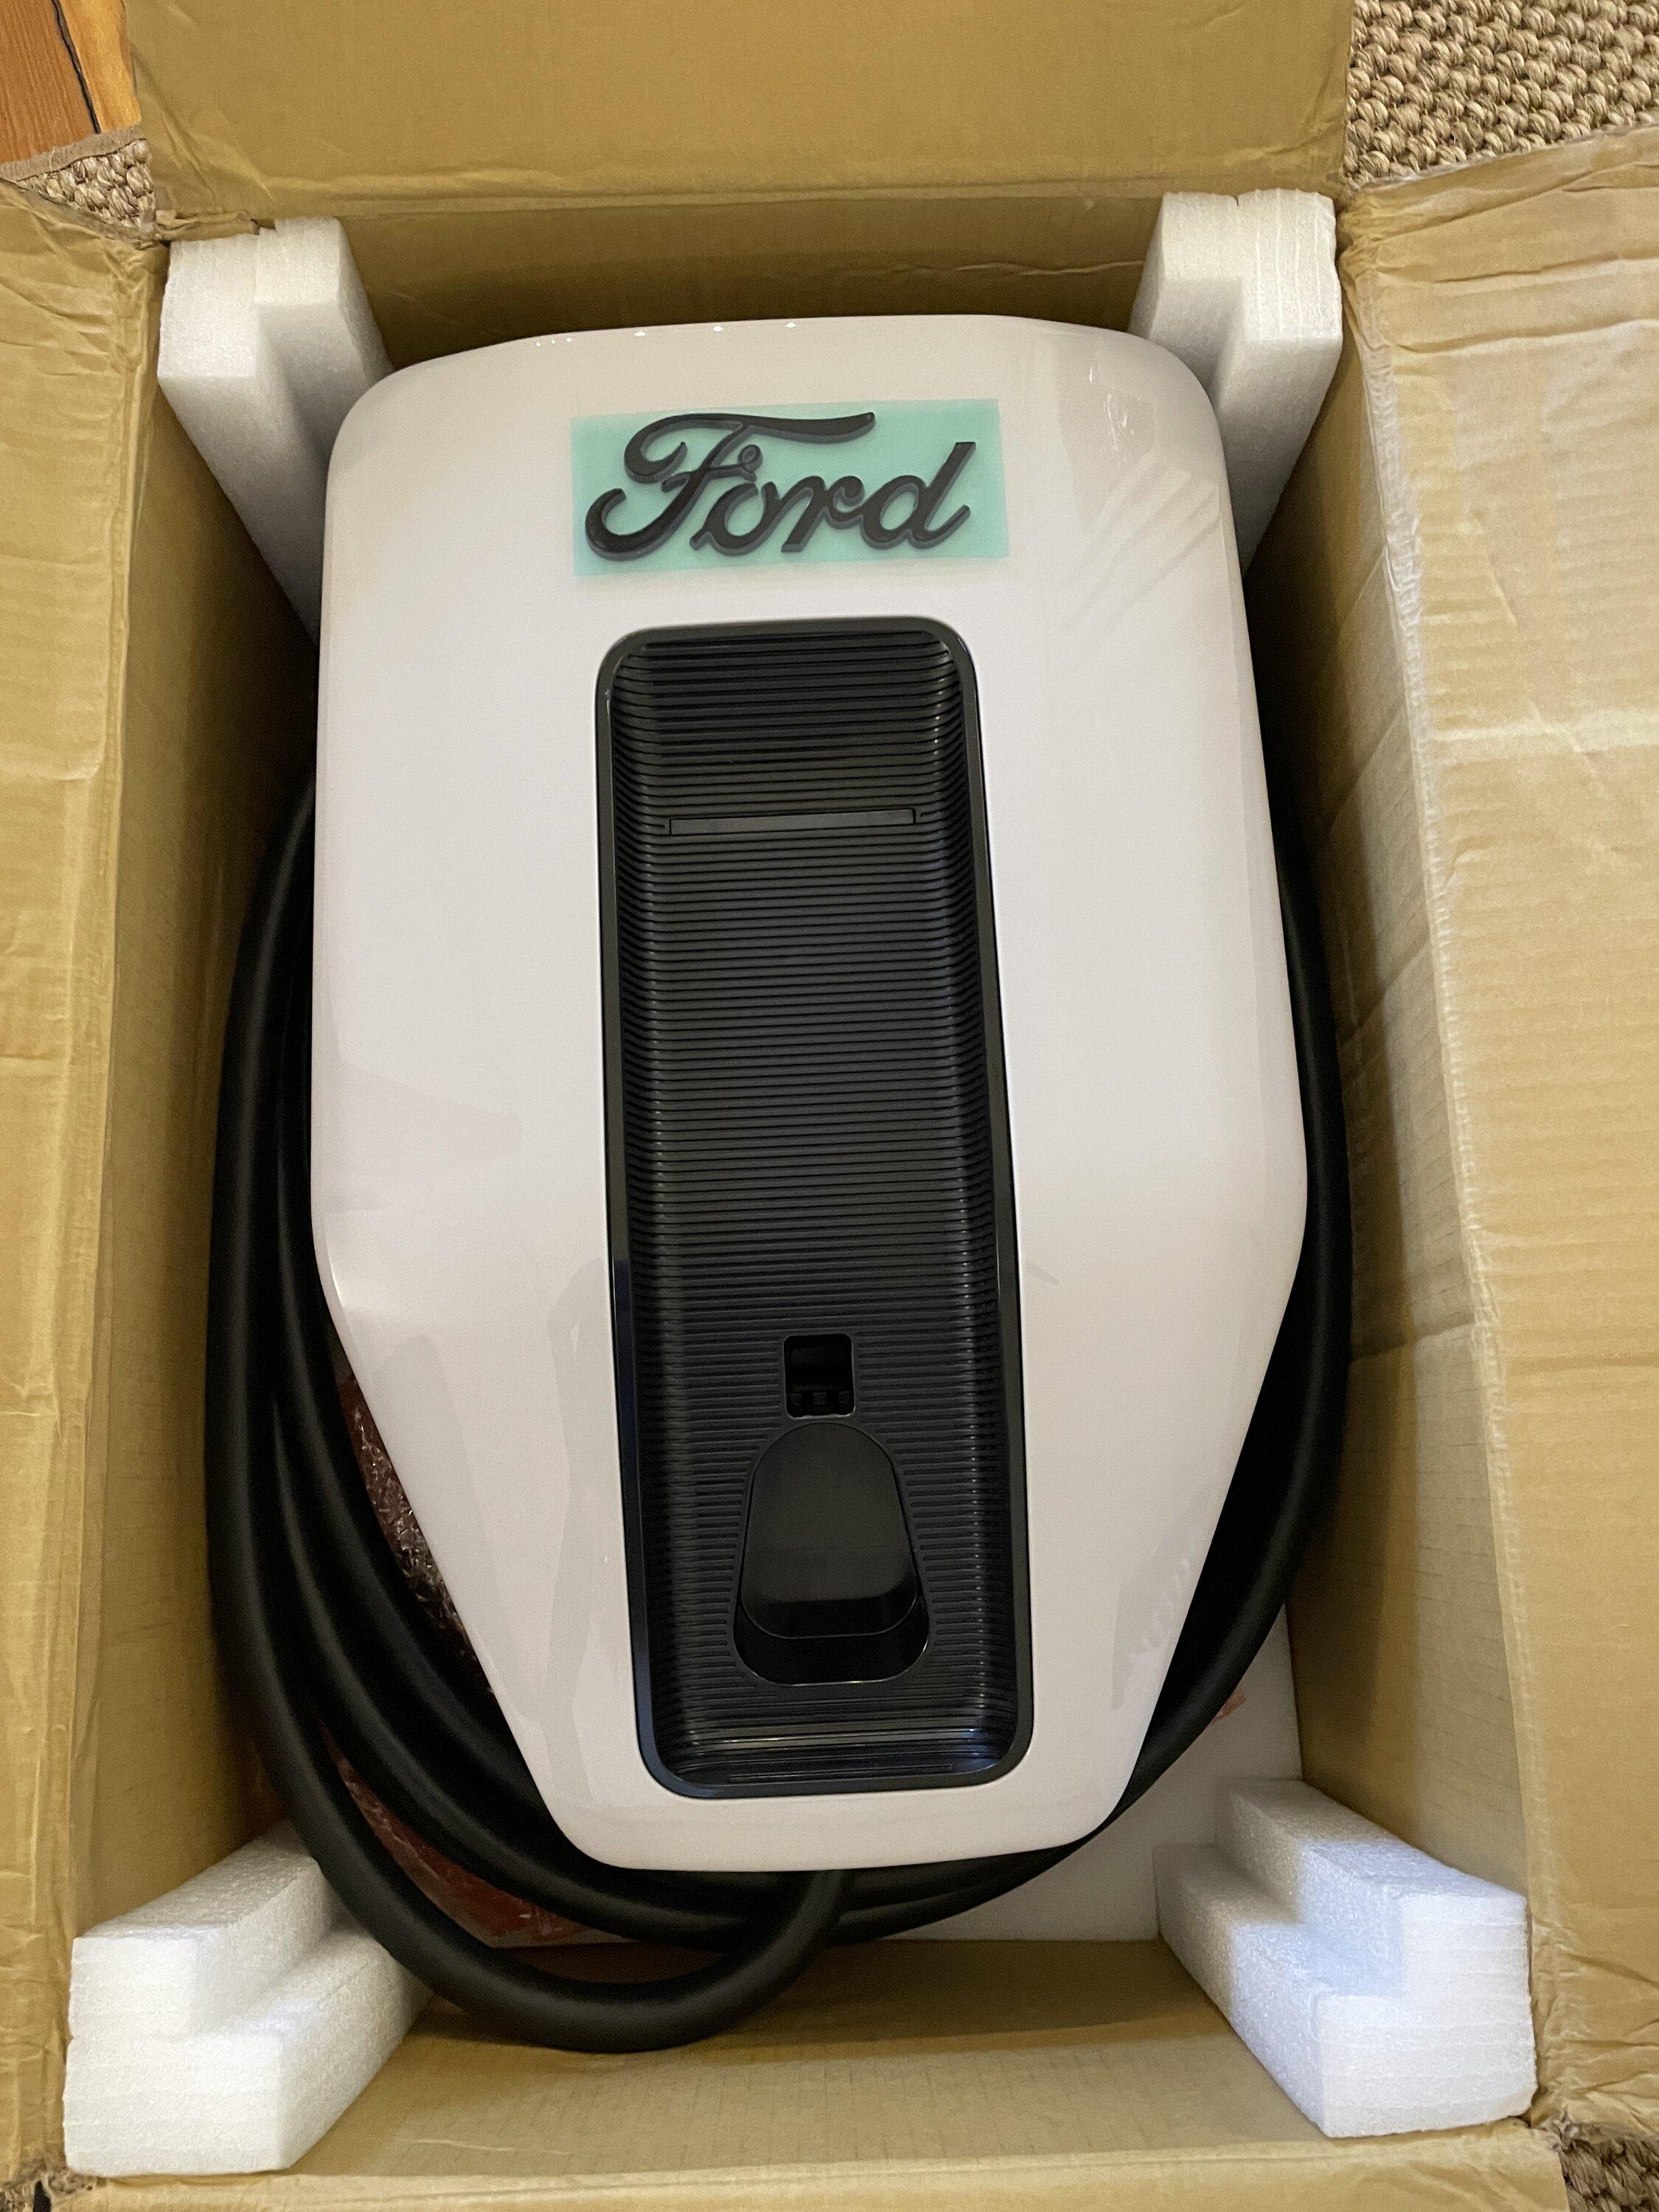 Ford F-150 Lightning Charge station pro $950 shipped FDA33754-A618-46A1-868F-A786FE22F731